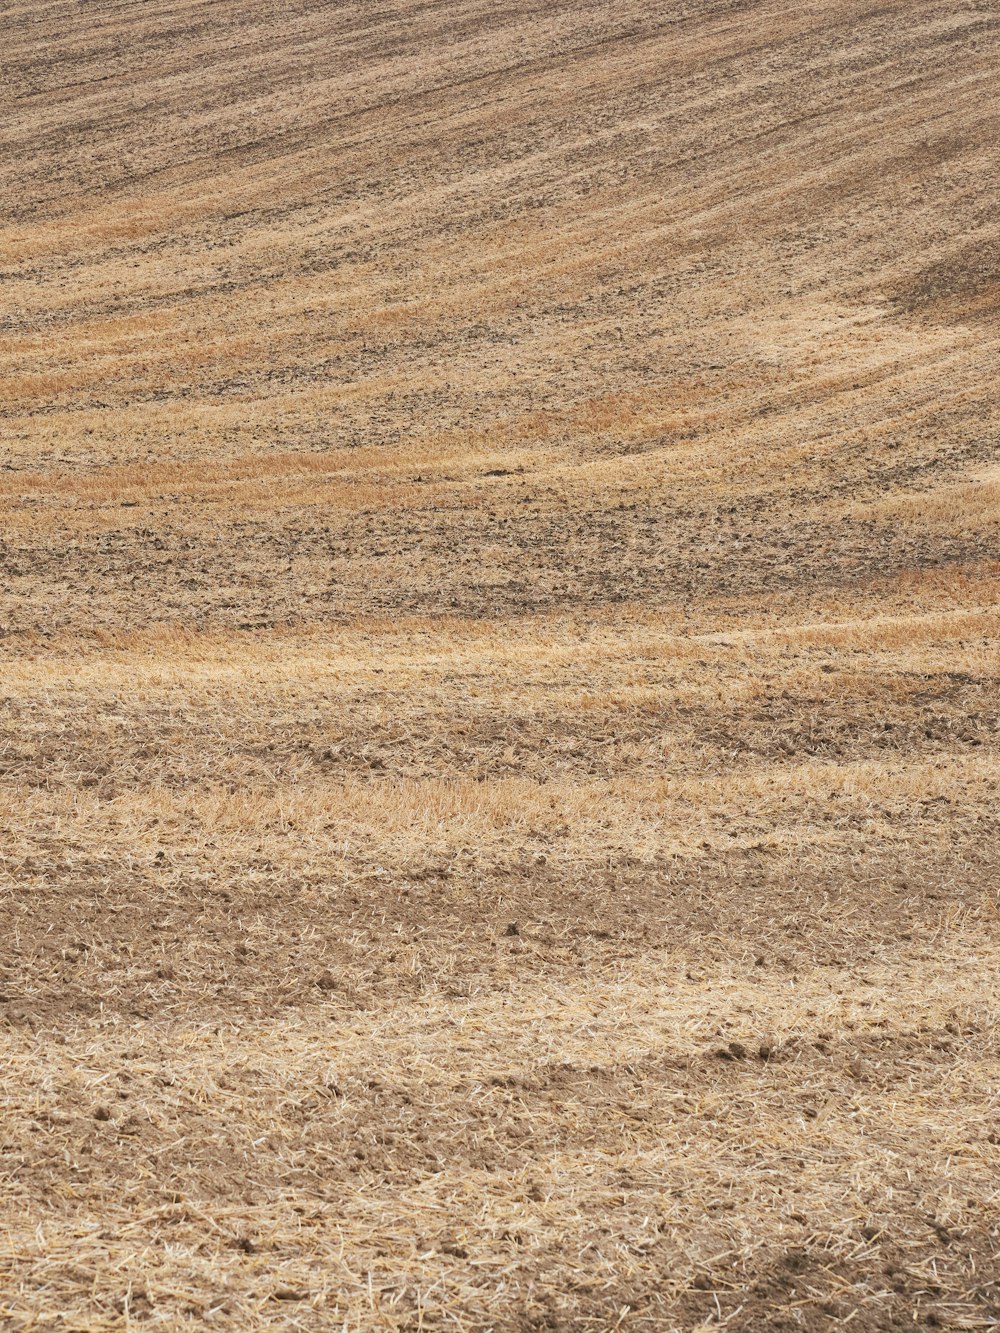 a horse standing in a field of dry grass